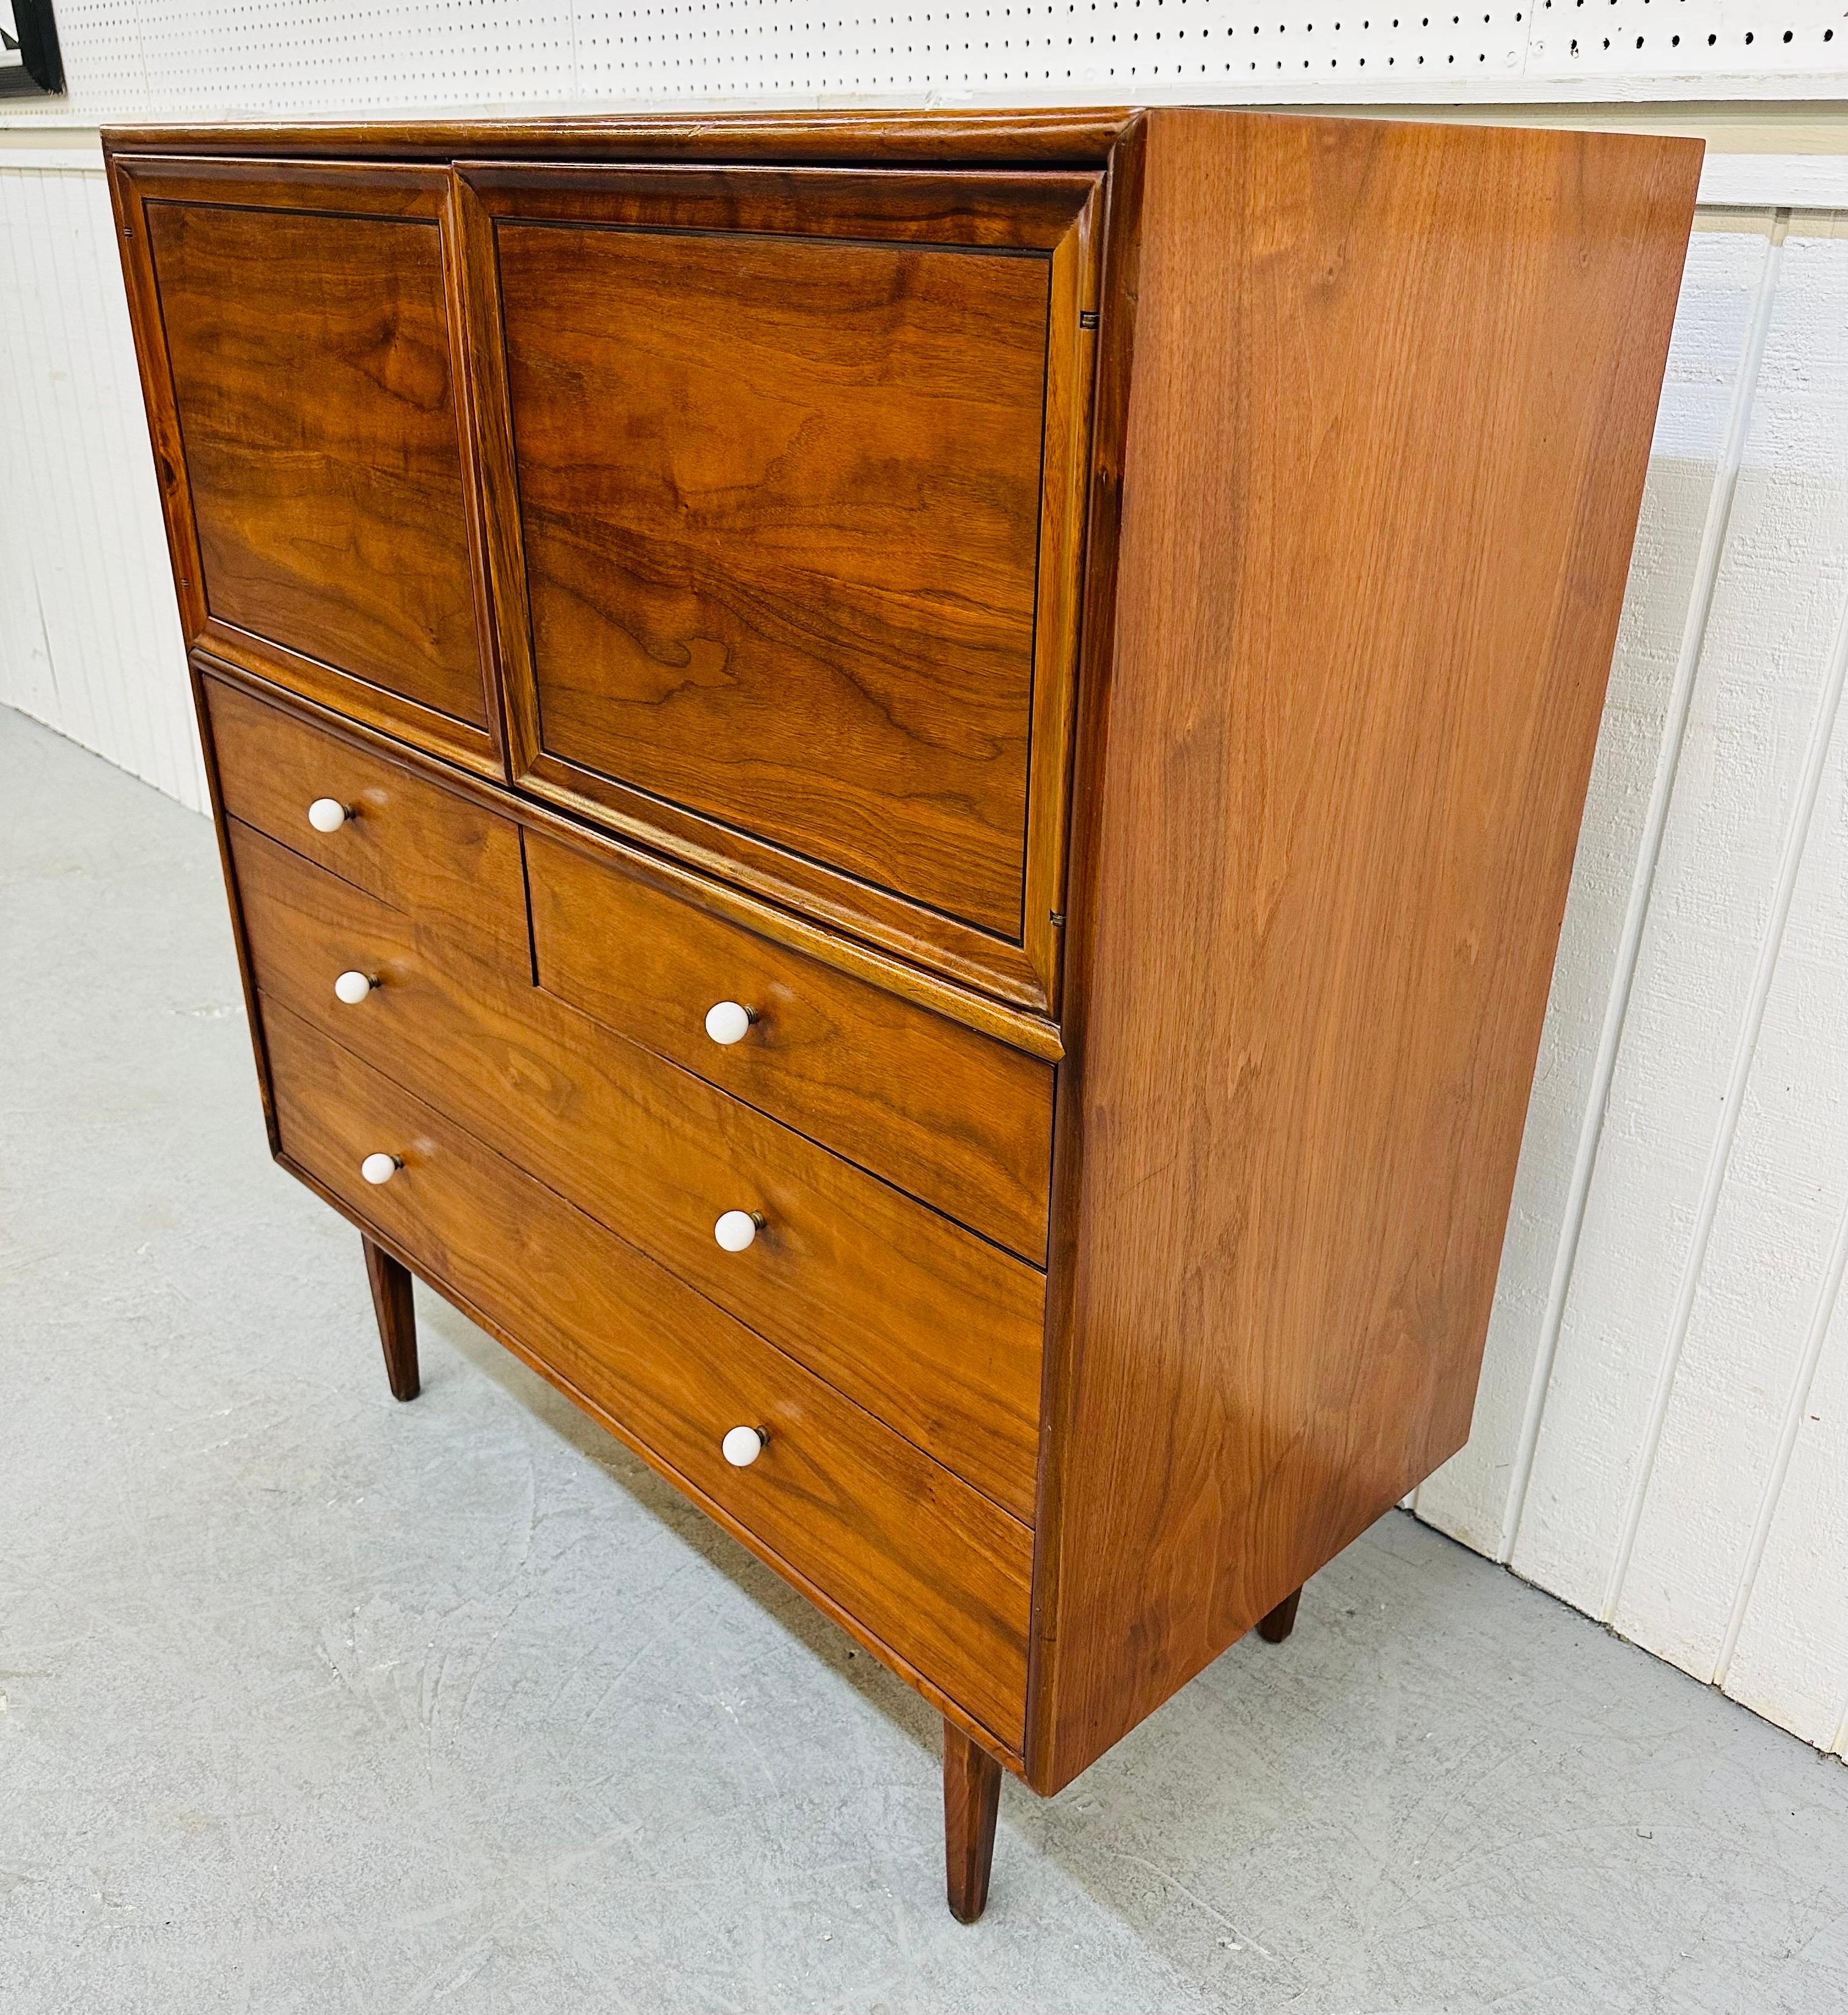 This listing is for a Mid-Century Modern Drexel declaration walnut high chest. Featuring a rectangular design, two doors up top that open up to three hidden drawers on the left, a hidden shaving mirror with storage space on the right, four drawers